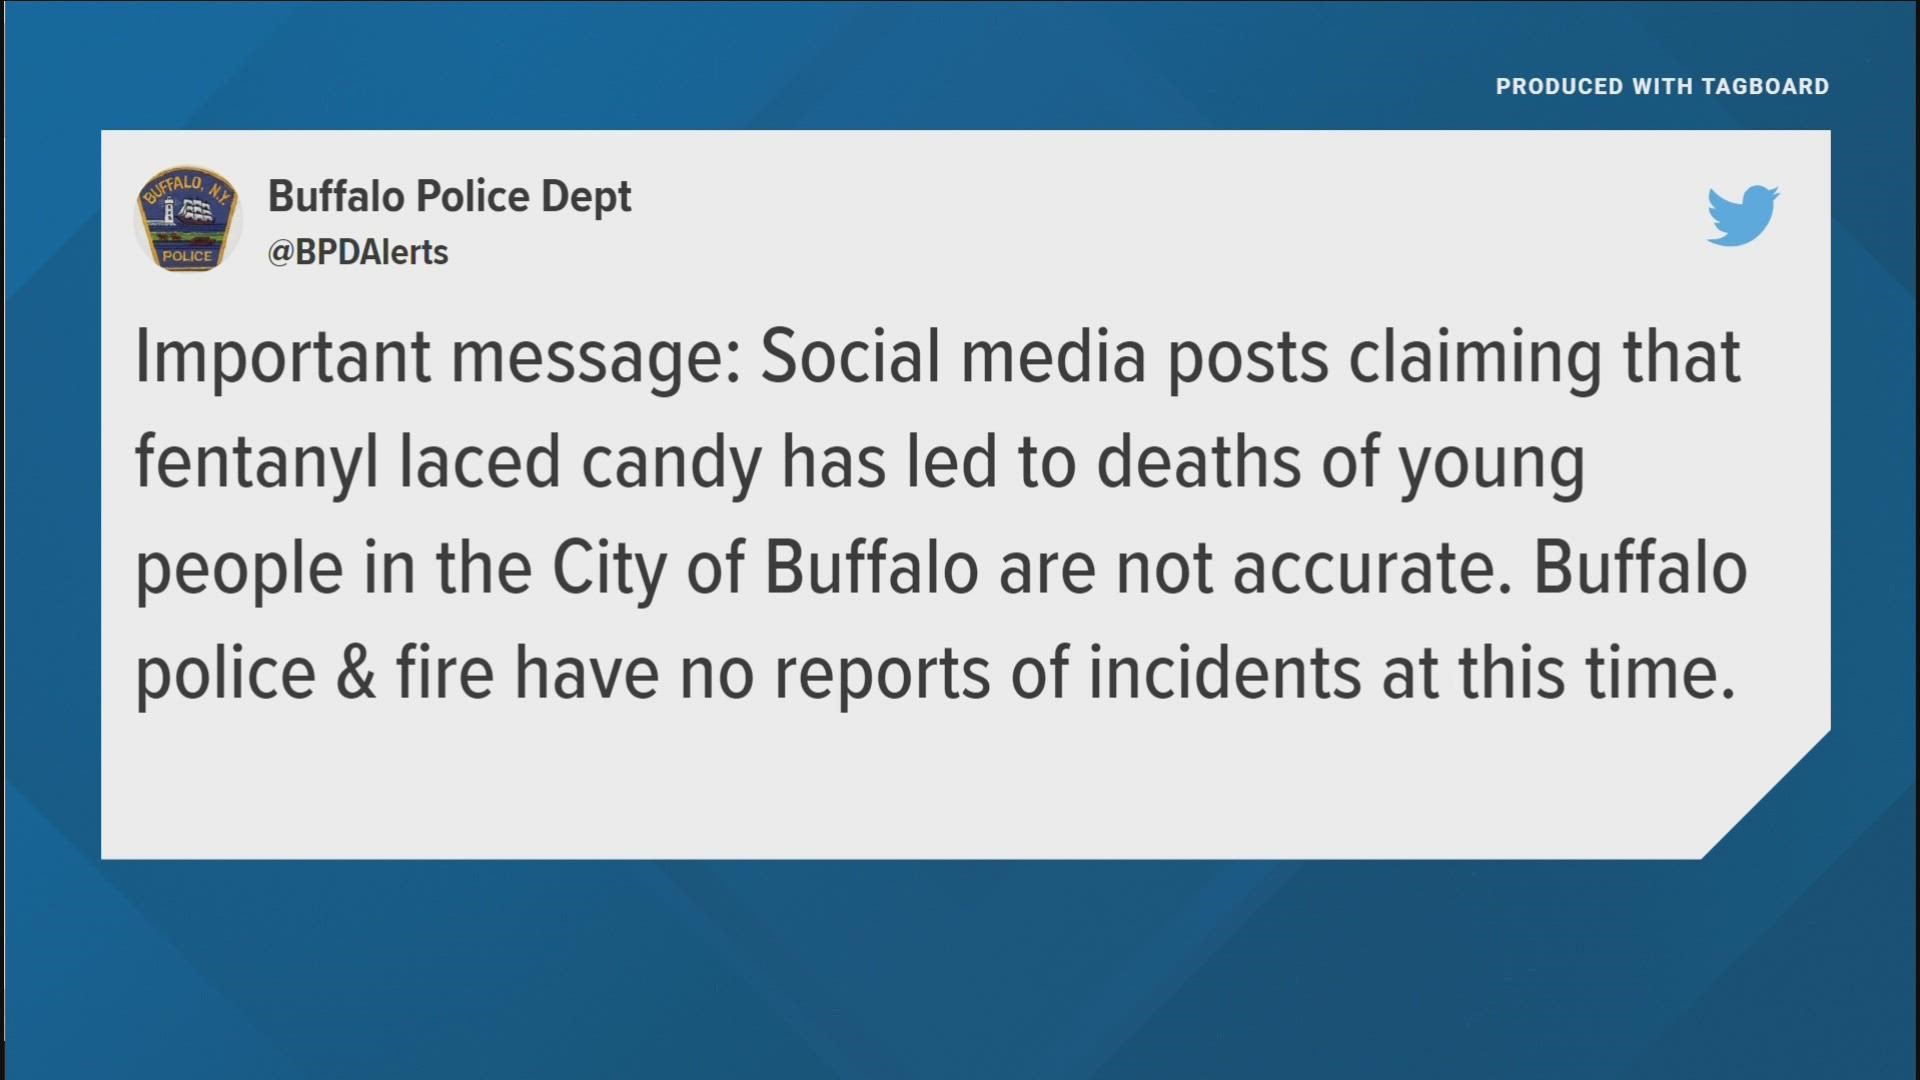 They say they are not true. and that they and the Buffalo fire department have no reports of any incidents from last night.